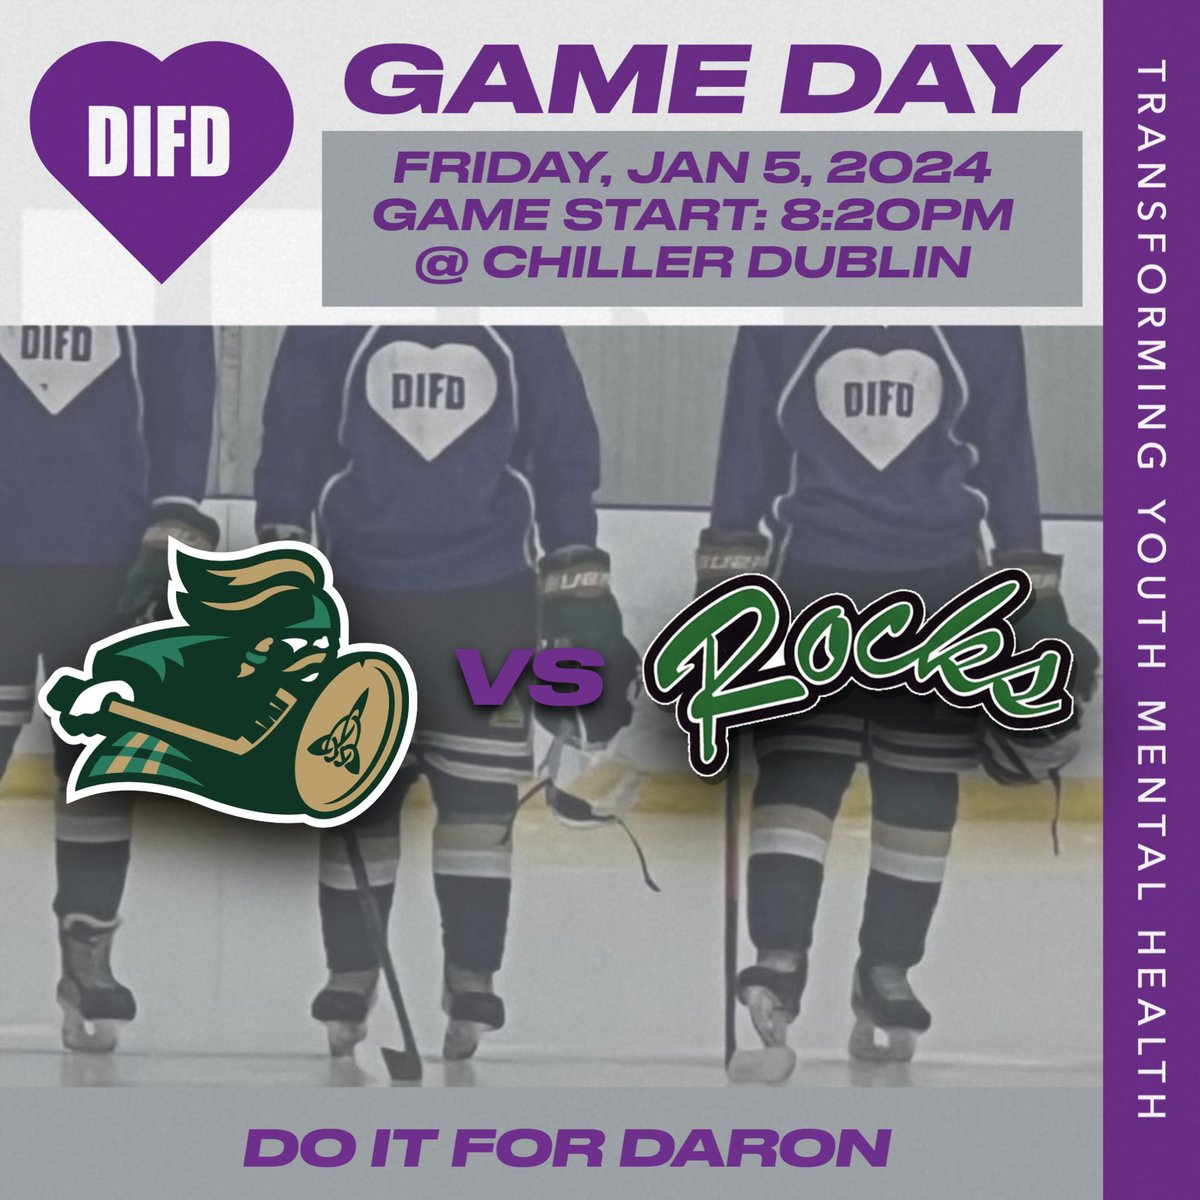 The 11th Annual Do It For Daron Jerome vs Coffman hockey game is tonight. Raising awareness for youth mental health issues, while minimizing the stigma connected with mental health concerns. Come show your support for an important mission.